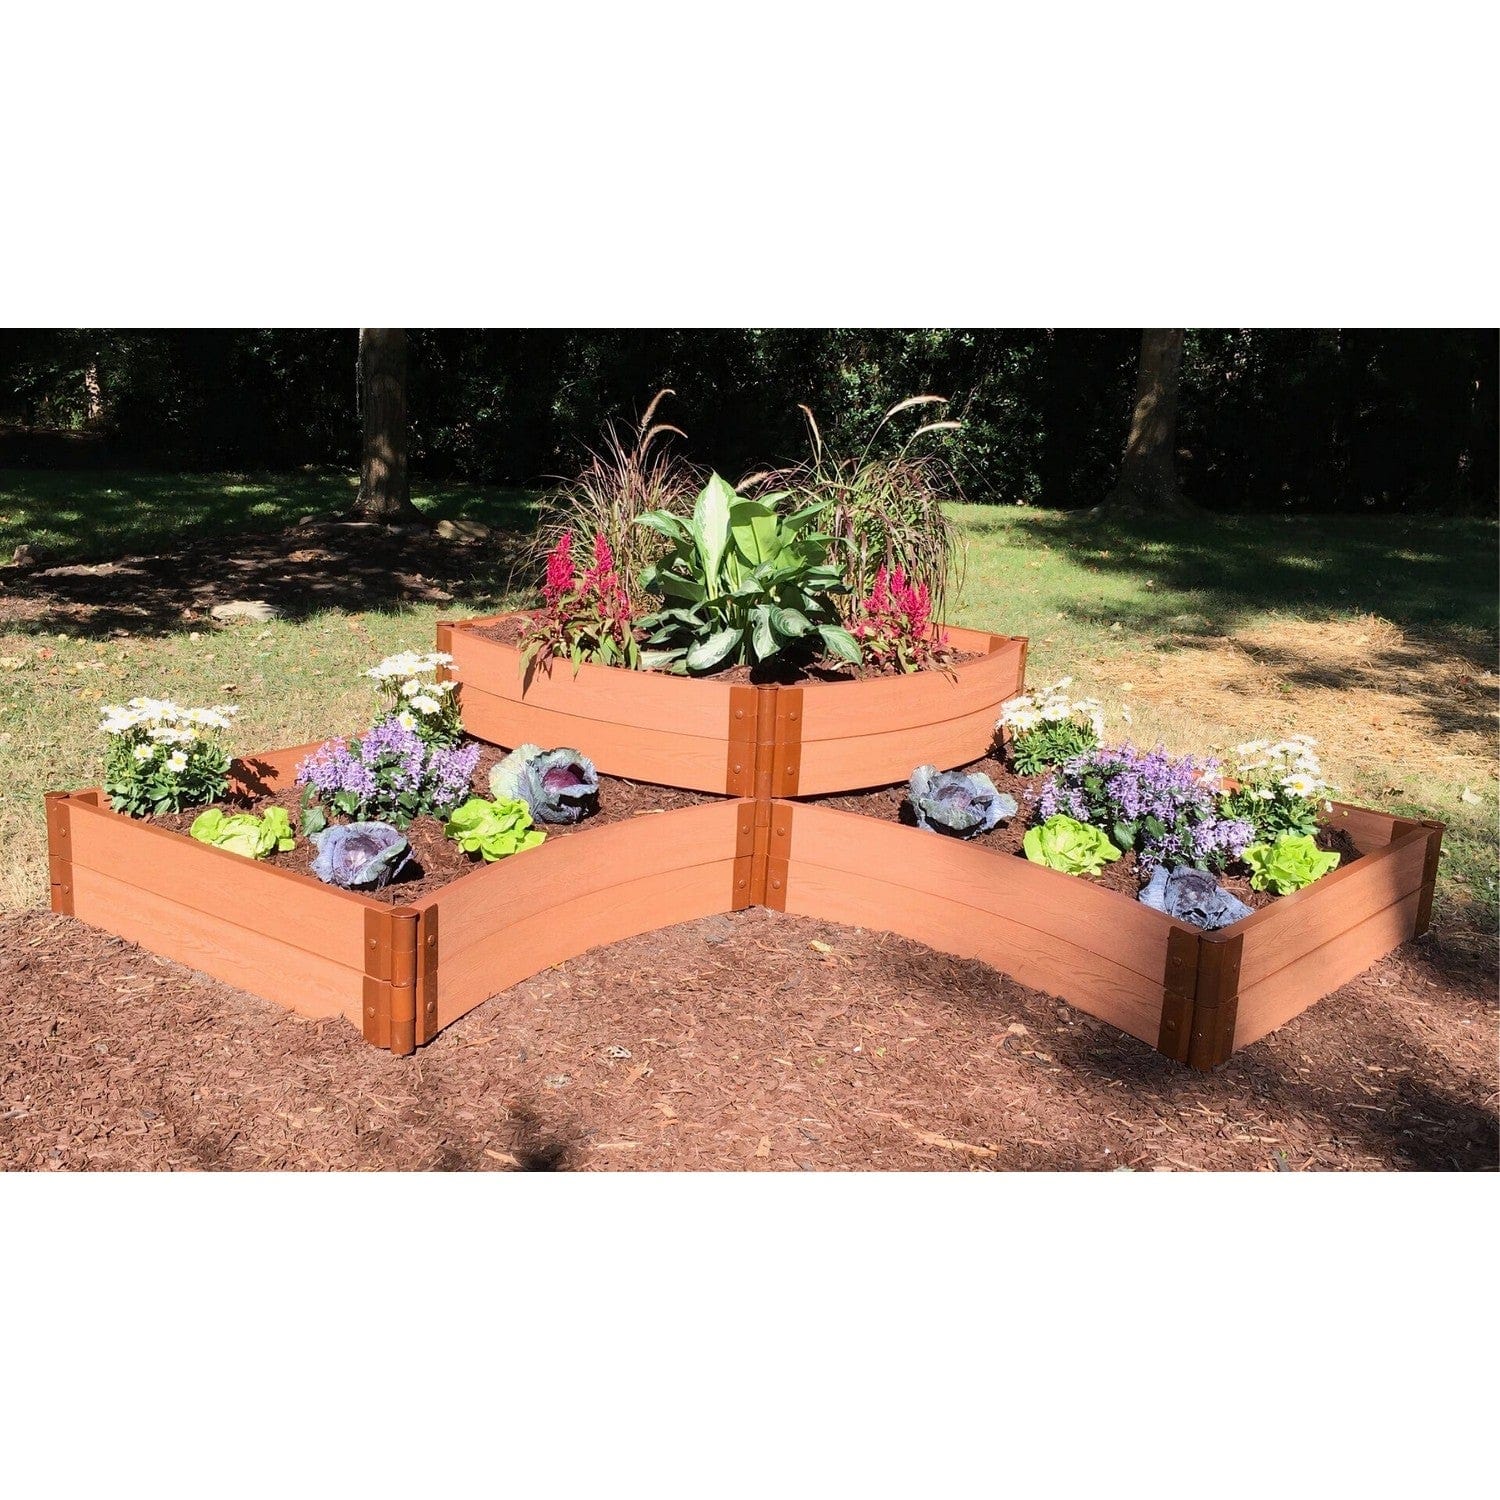 Frame It All Gardening Accessories Frame It All | Tool-Free Teardrop Curved Corner Raised Garden Bed (2-Tier) 8' X 8' X 5.5" - Weathered Wood - 1" Profile 800001007